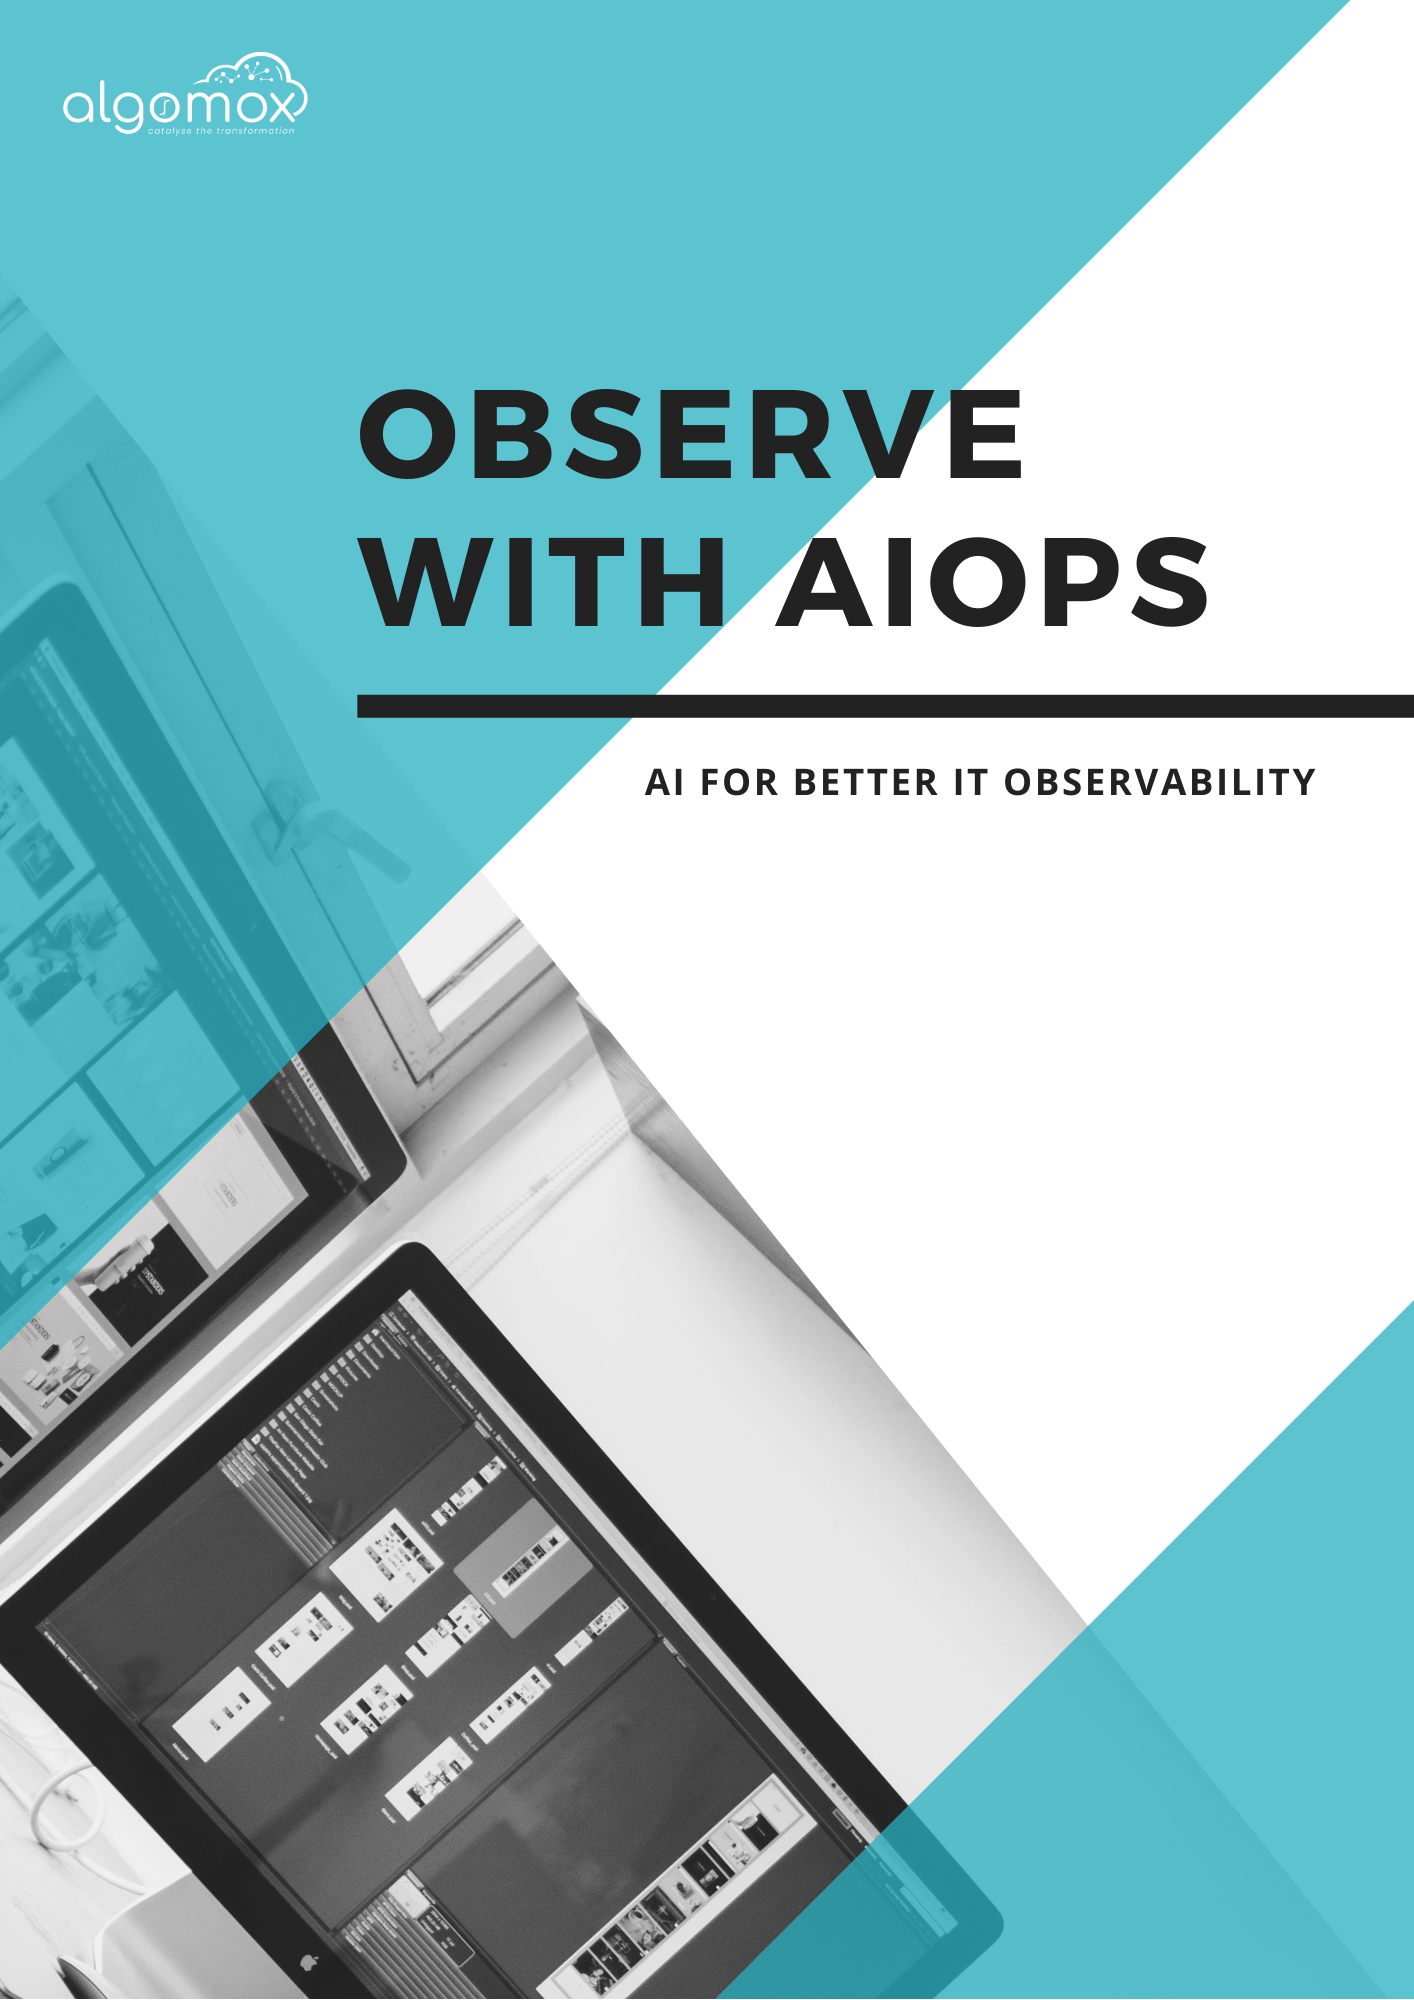 Observe with AIOps: AI for IT monitoring